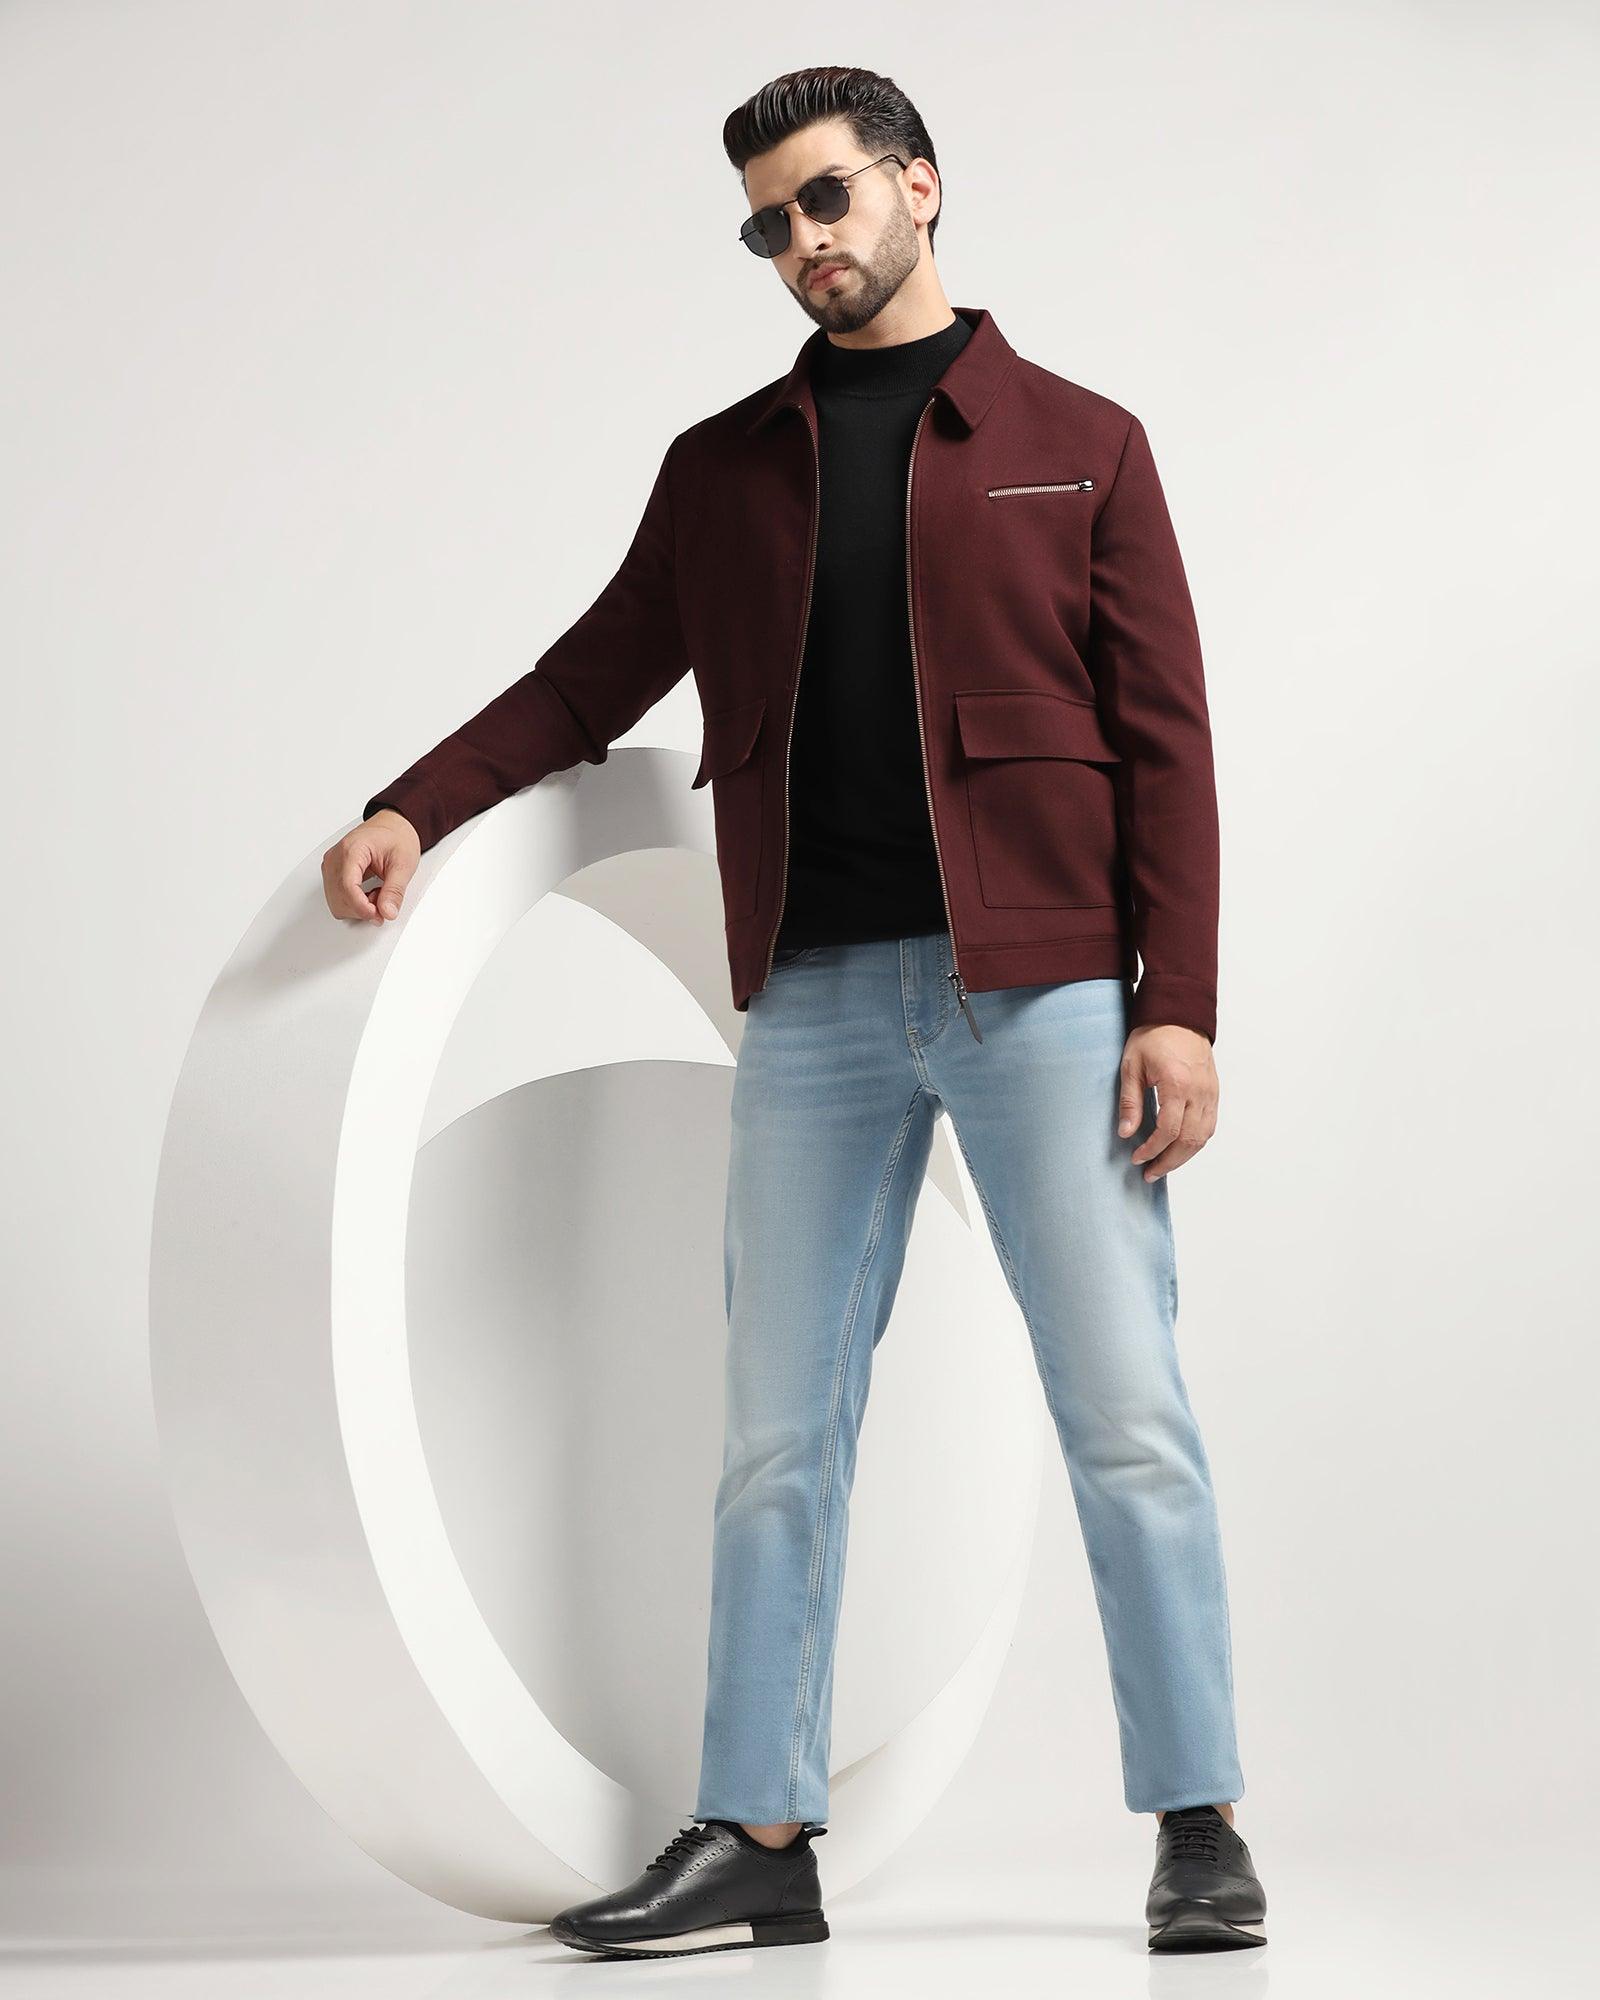 Burgundy Hoodie with Denim Jacket Outfits For Men (11 ideas & outfits) |  Lookastic